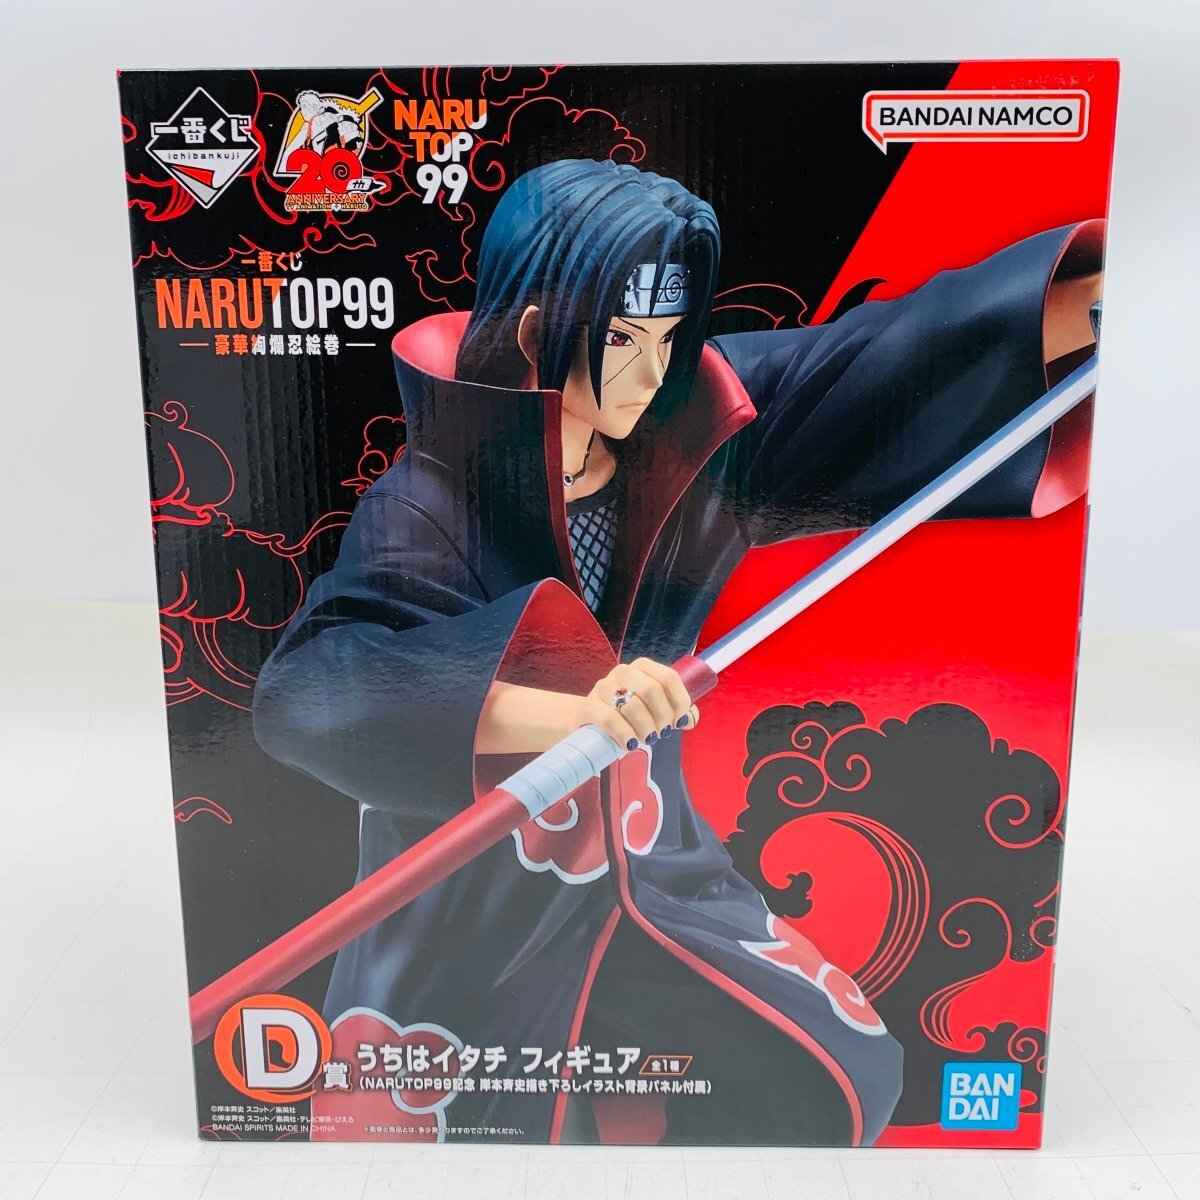  new goods unopened most lot NARUTOP99 gorgeous .... volume D... is itachi figure NARUTOP99 memory .book@. history .. under .. illustration background panel attached 